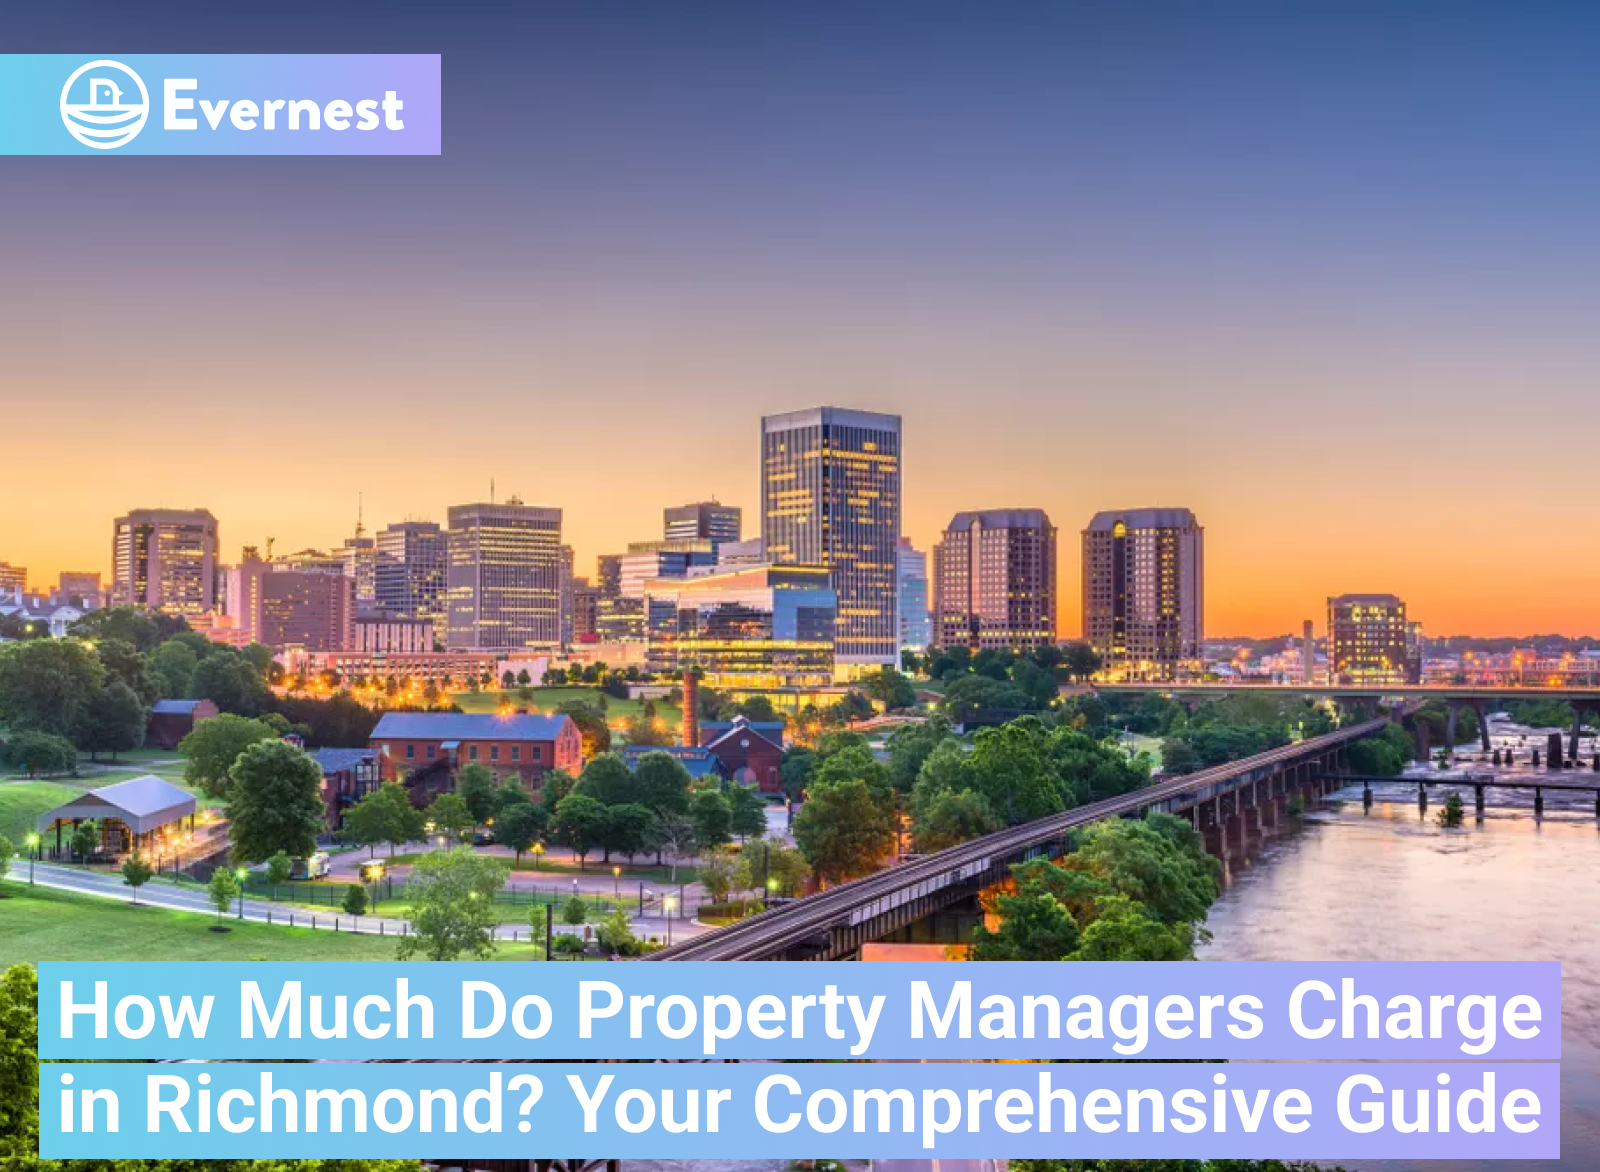 How Much Do Property Managers Charge in Richmond?